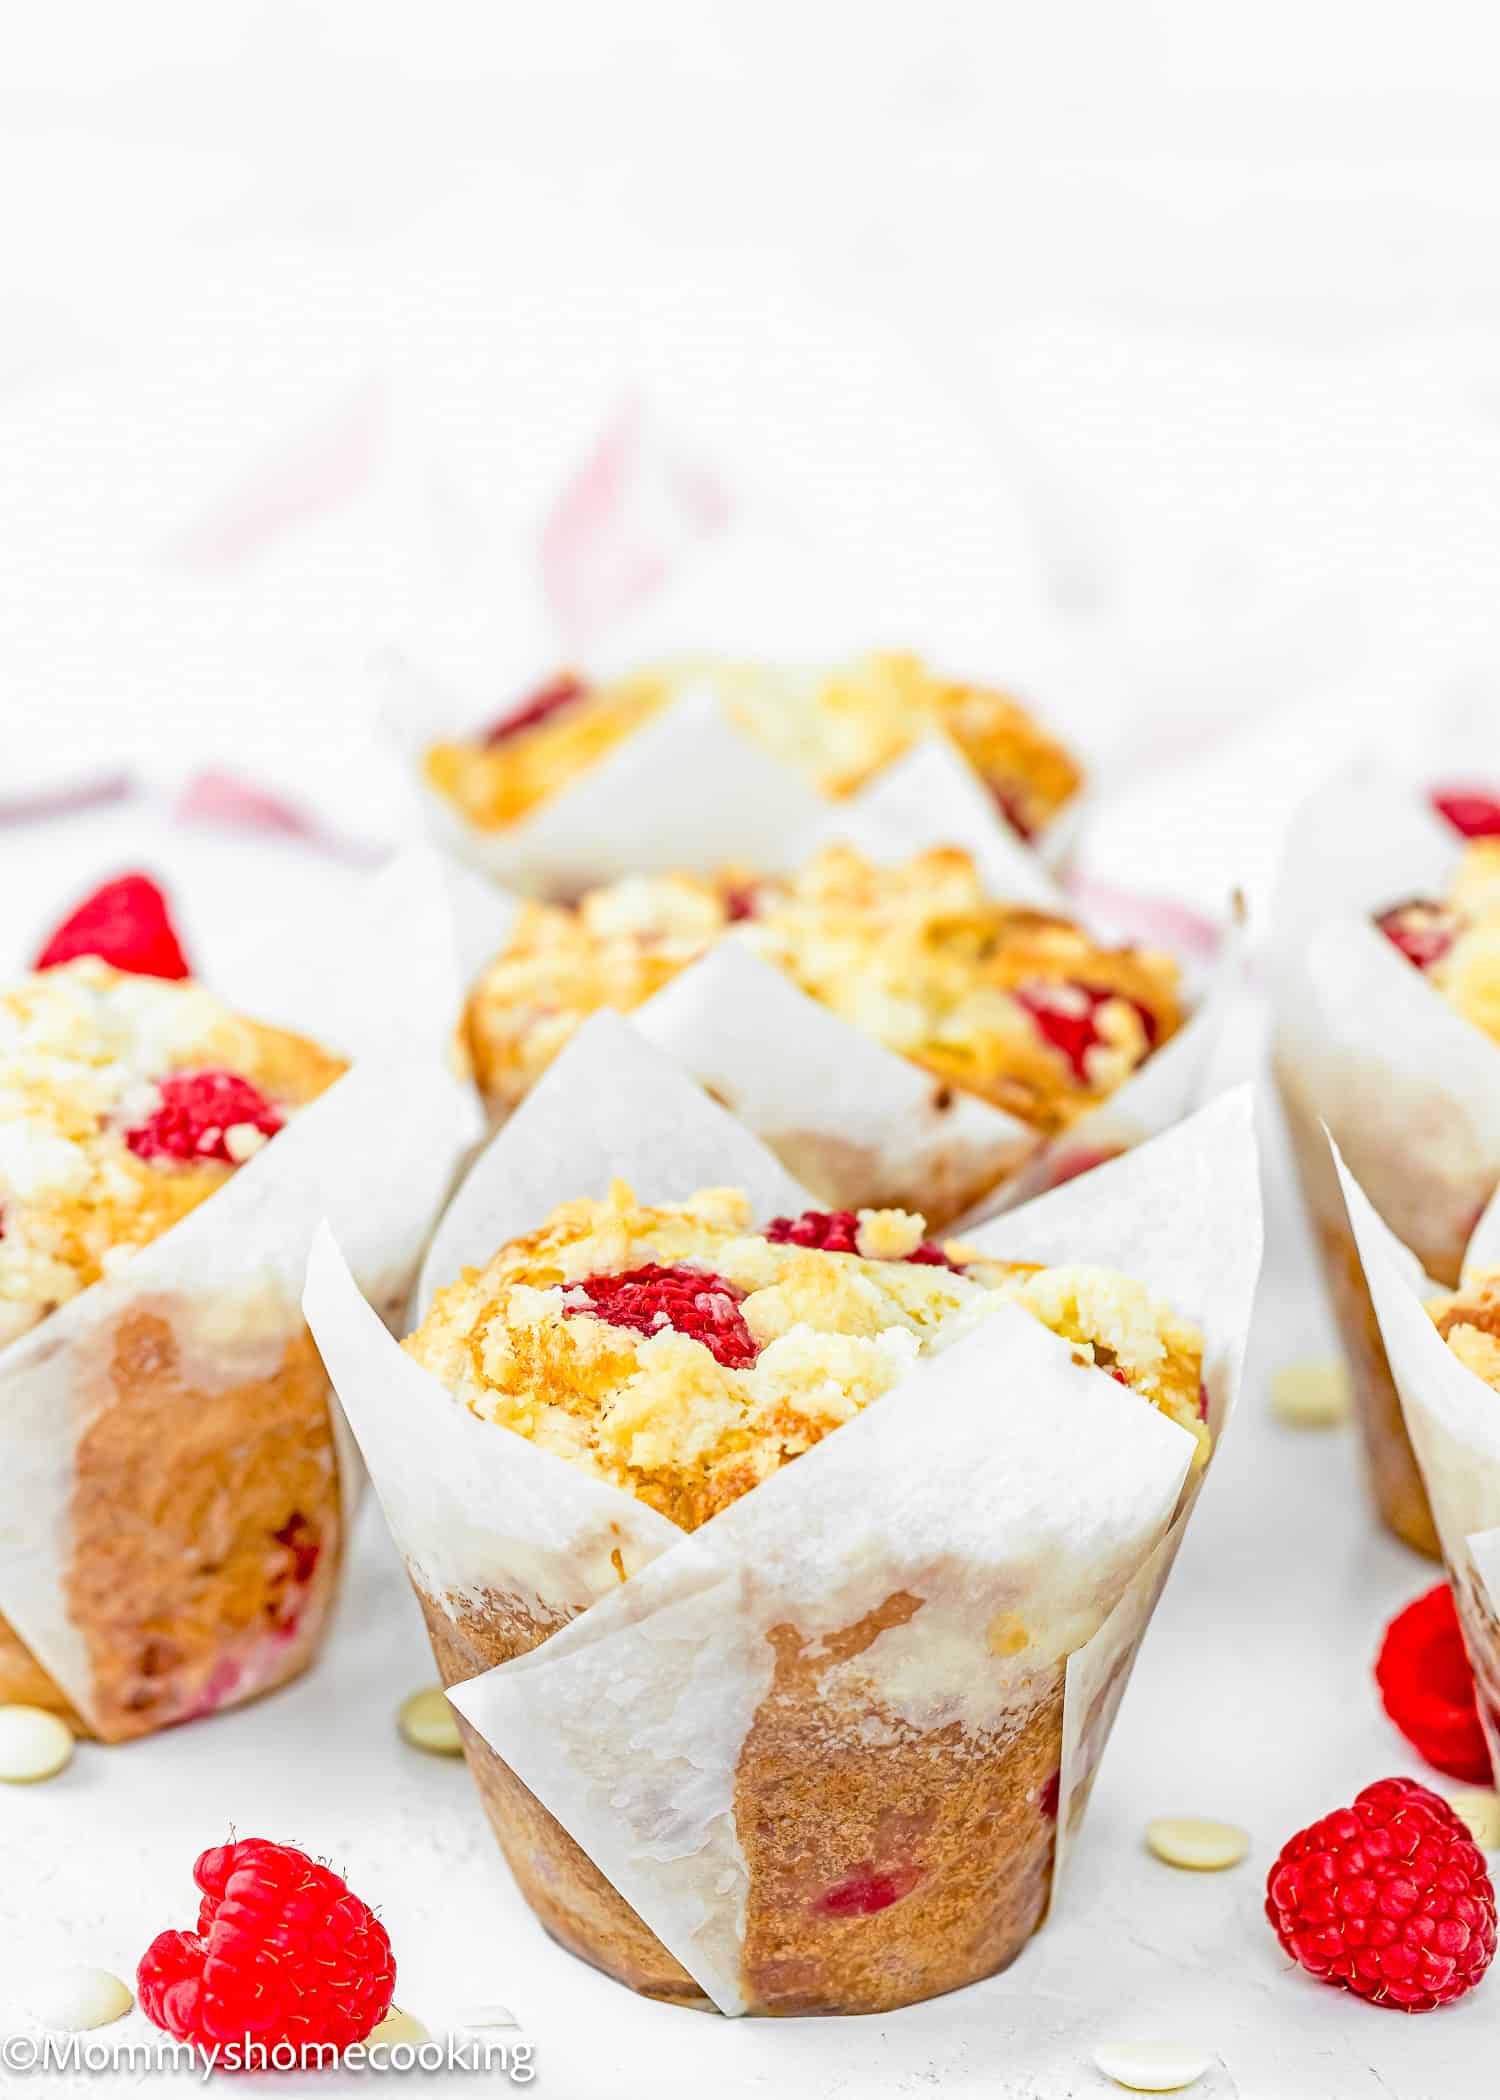 Easy Vegan Raspberry Muffins with tulip liners over a white surface with fresh raspberries and white chocolate around them.